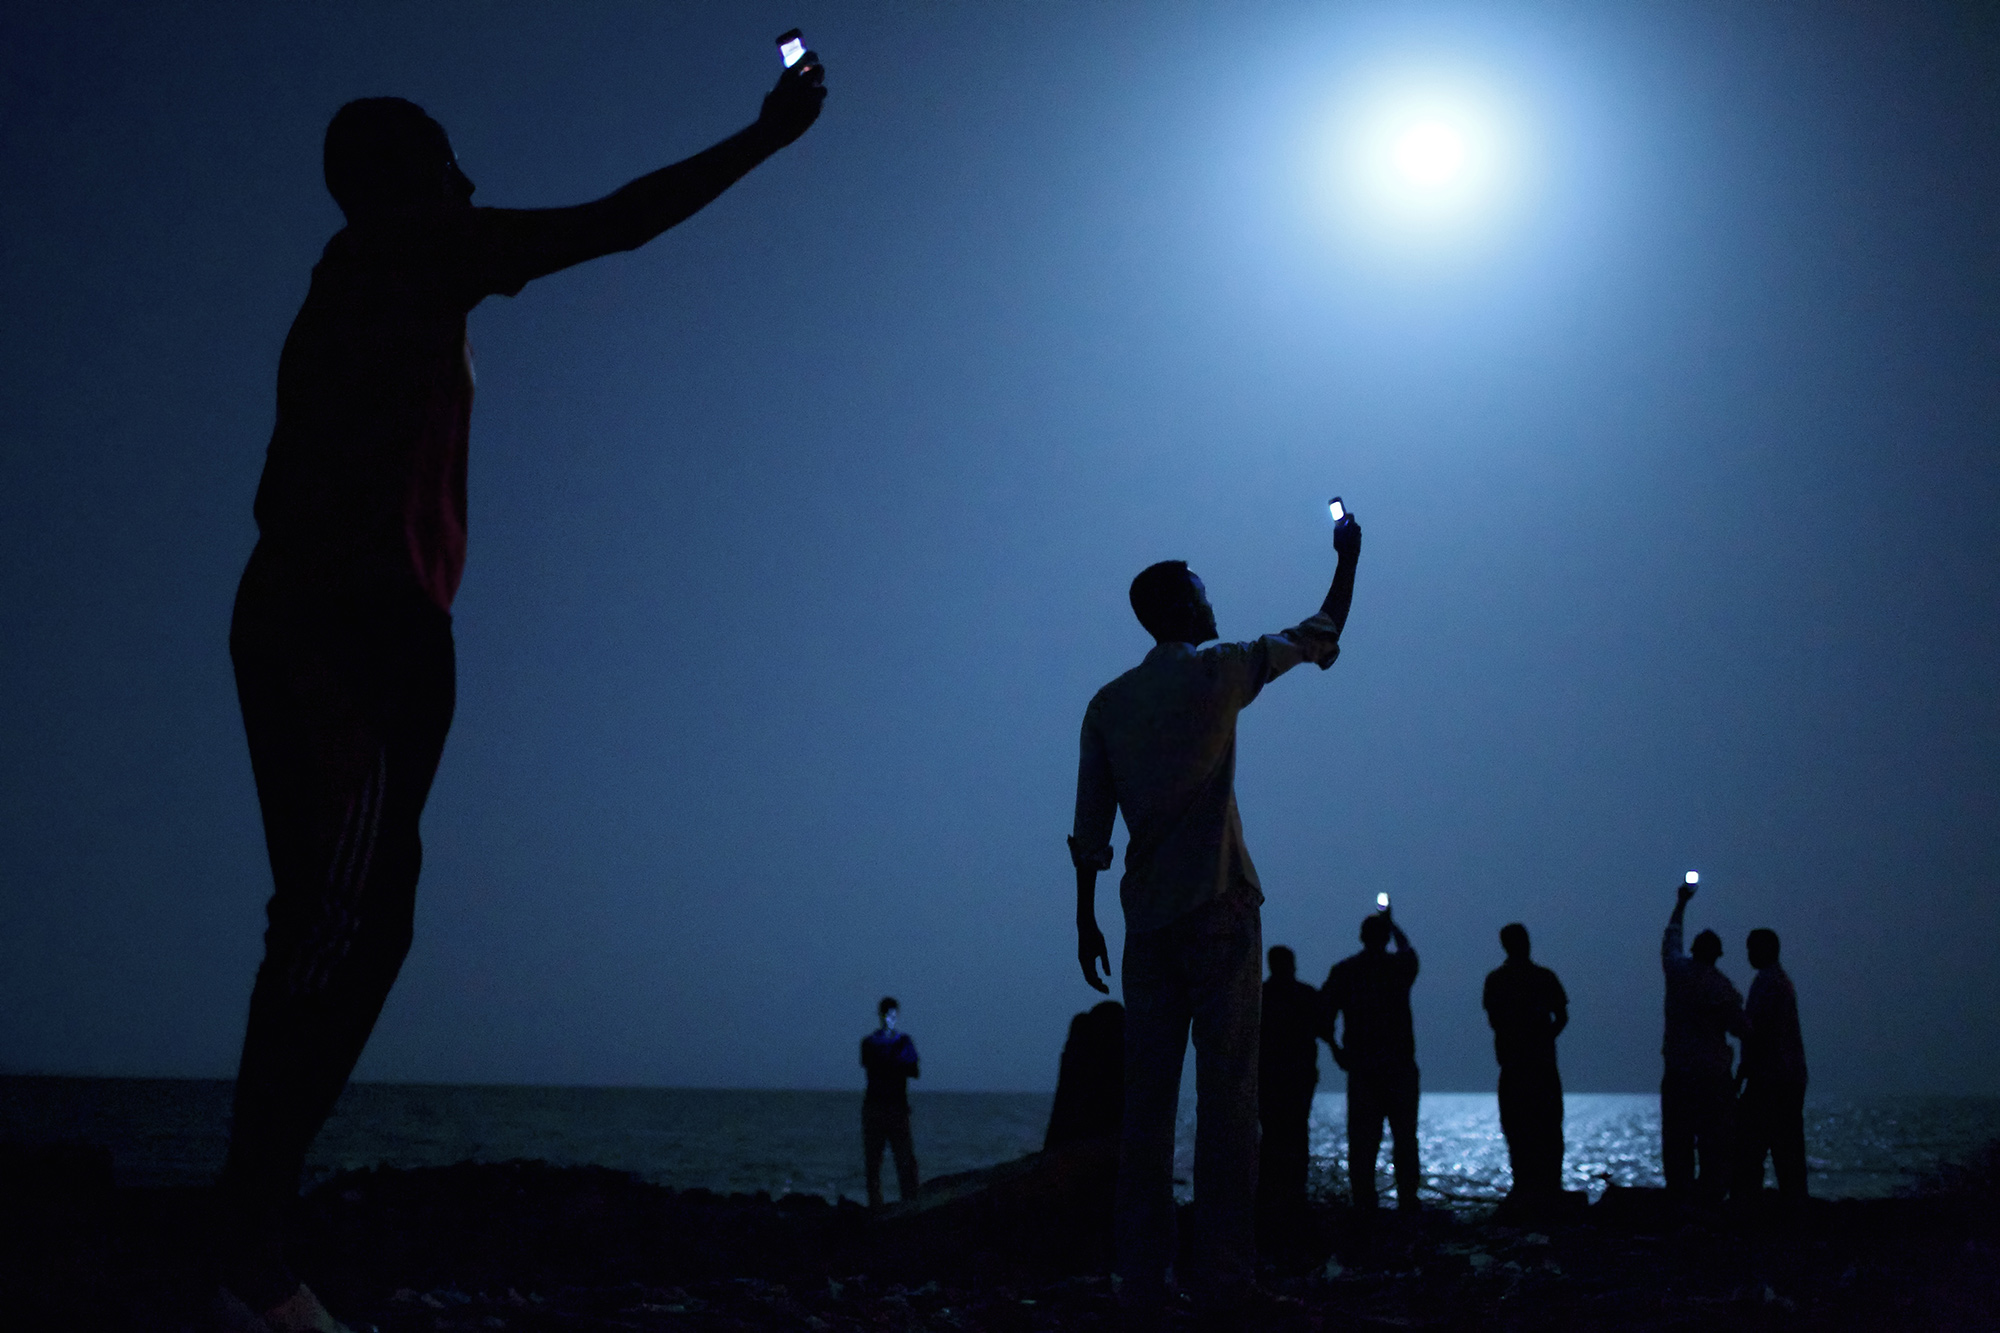 Impoverished African migrants crowd the night shore of Djibouti city on February 26, 2013, trying to capture inexpensive cell signals from neighboring Somalia—a tenuous link to relatives abroad. ©John Stanmeyer/VII